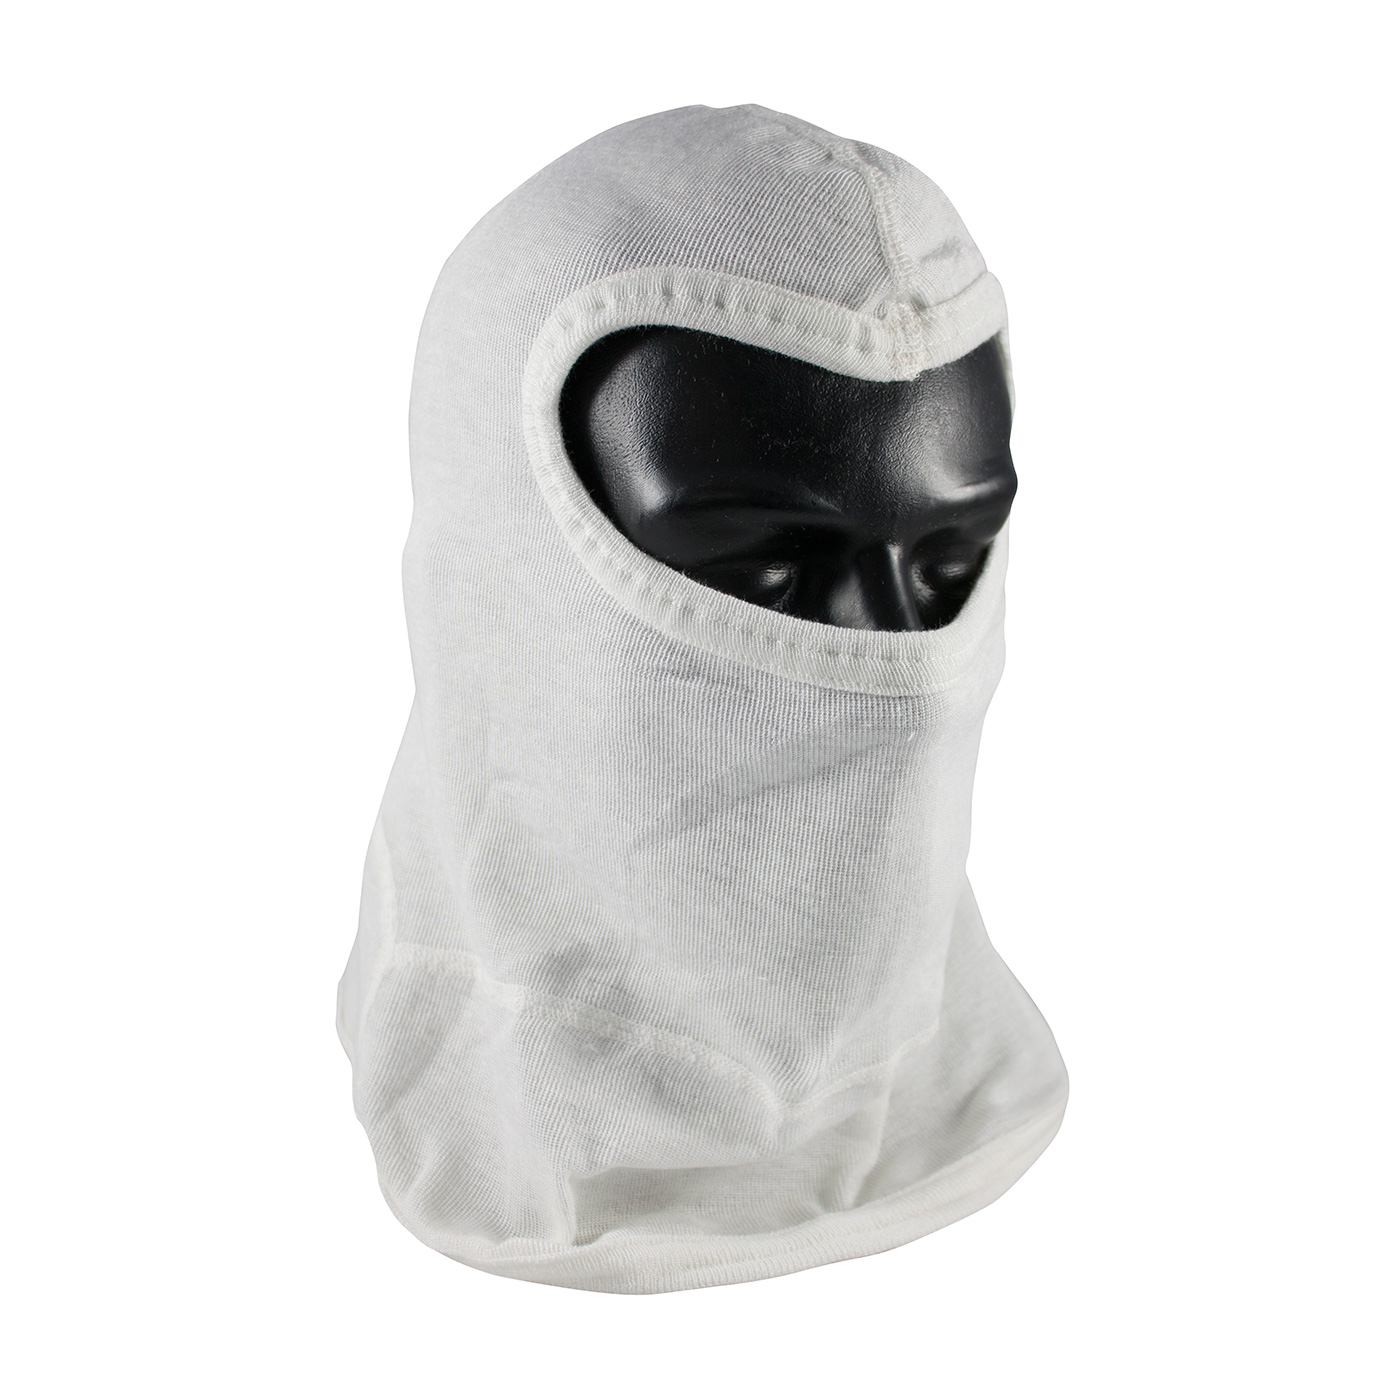 PIP® Nomex® White Single Layer Fire Resistant Full Face Slit Eye Hood With Bib - One Size